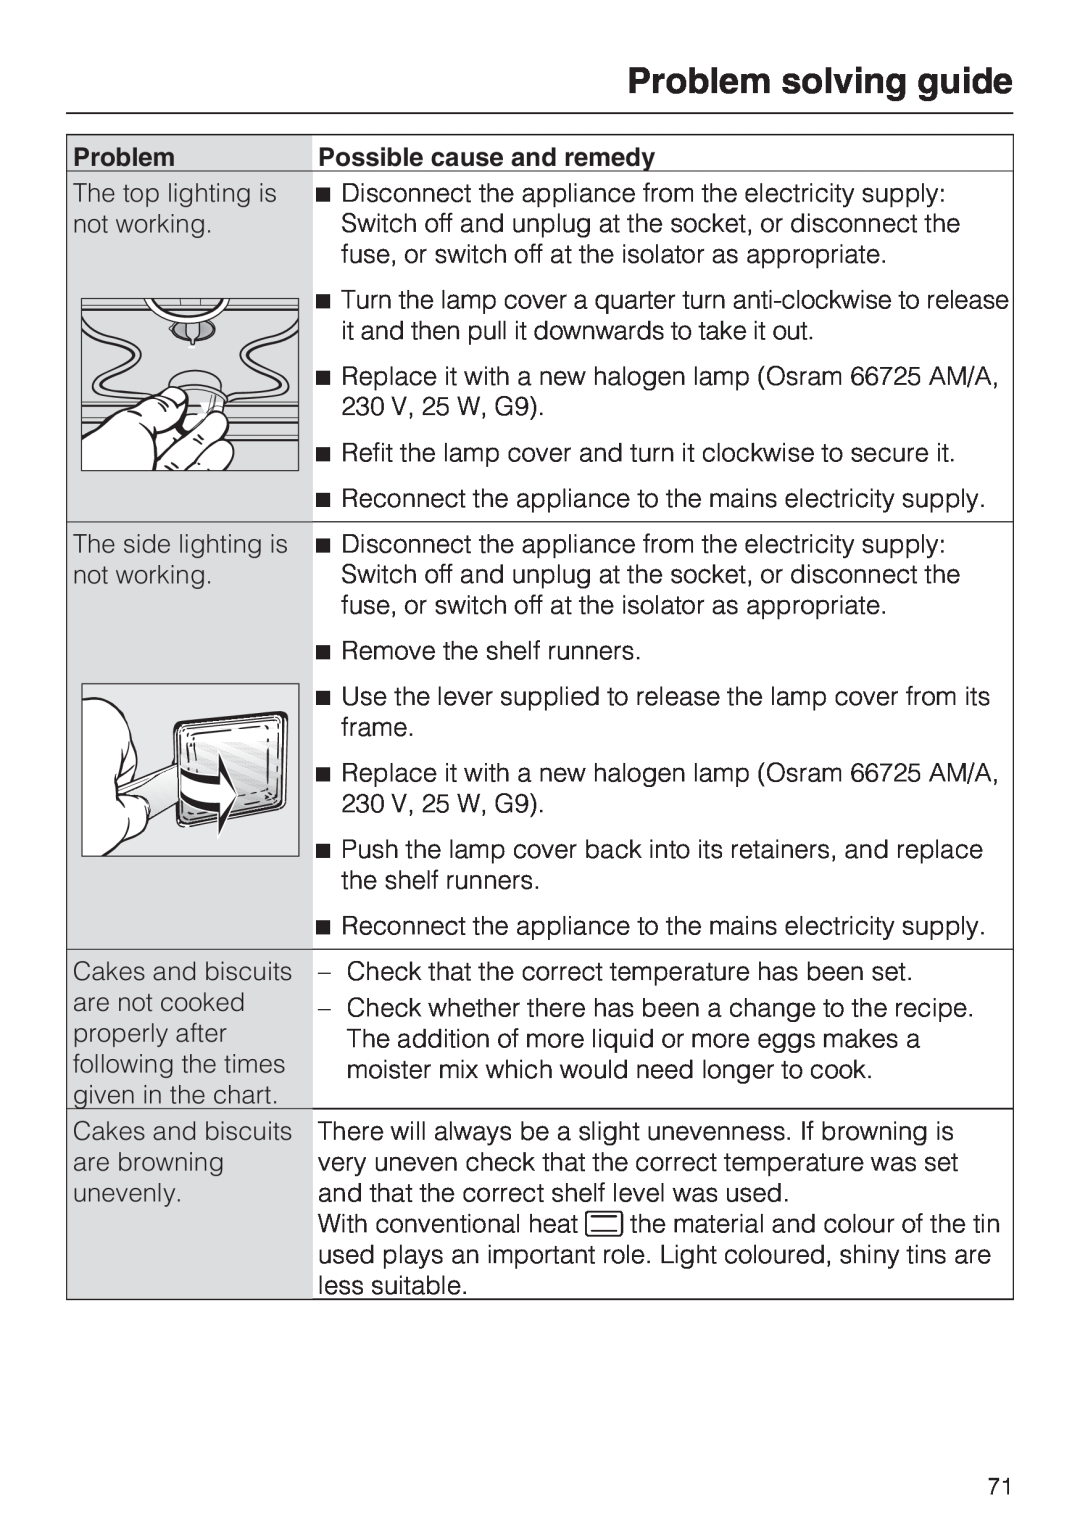 Miele H 5961 B installation instructions Problem solving guide, Possible cause and remedy 